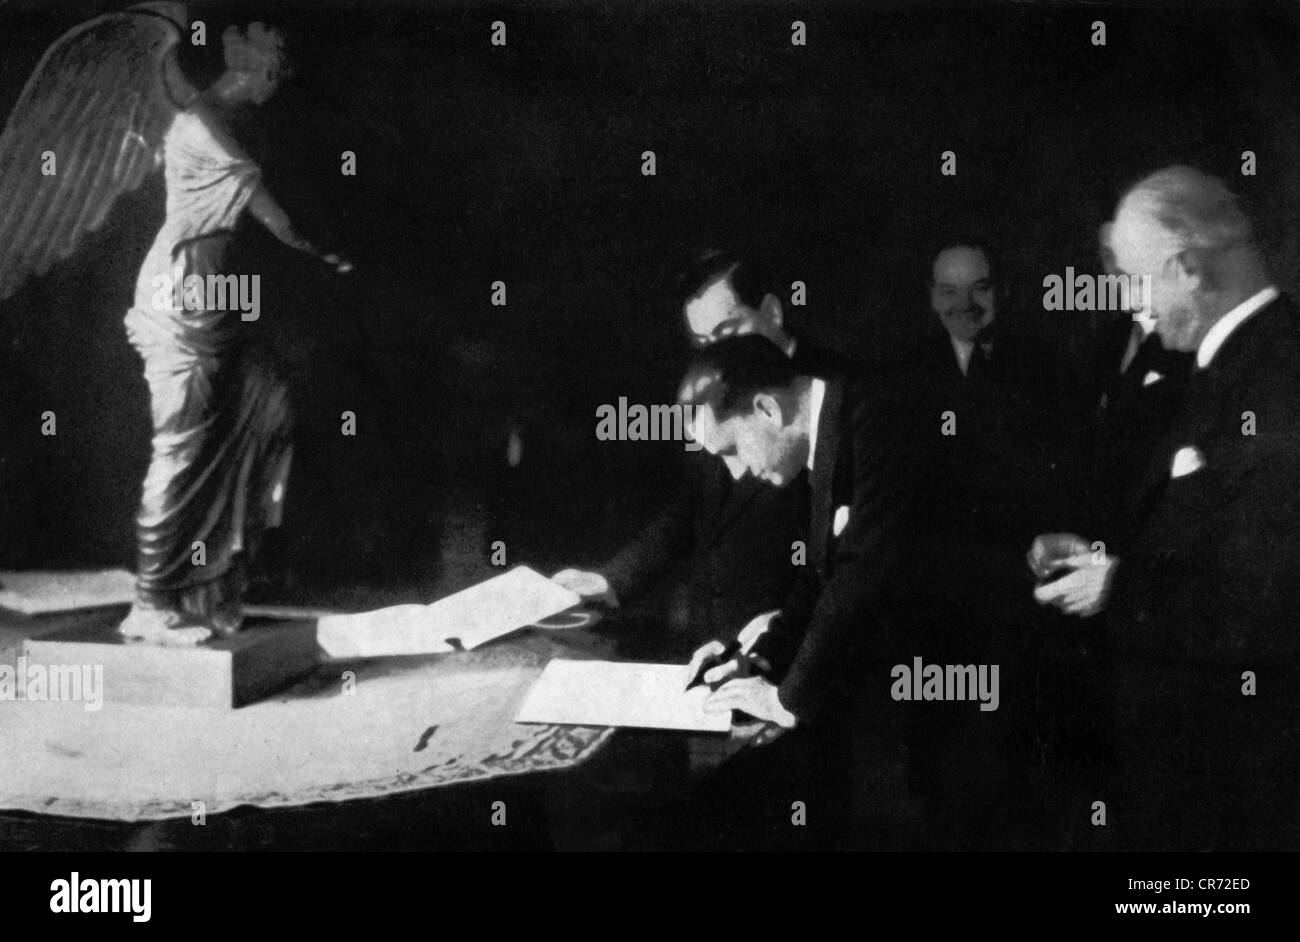 Ciano, Gian Galeazzo, 18.3.1903 - 11.1.1944, Italian politician (PNF), Foreign Minister 9.6.1936 - 25.7.1943, signing the Mediterrenean Agreement with Great Britain, Palazzo Chigi, Rome, 2.1.1937, right: Sir Eric Drummond, , Stock Photo